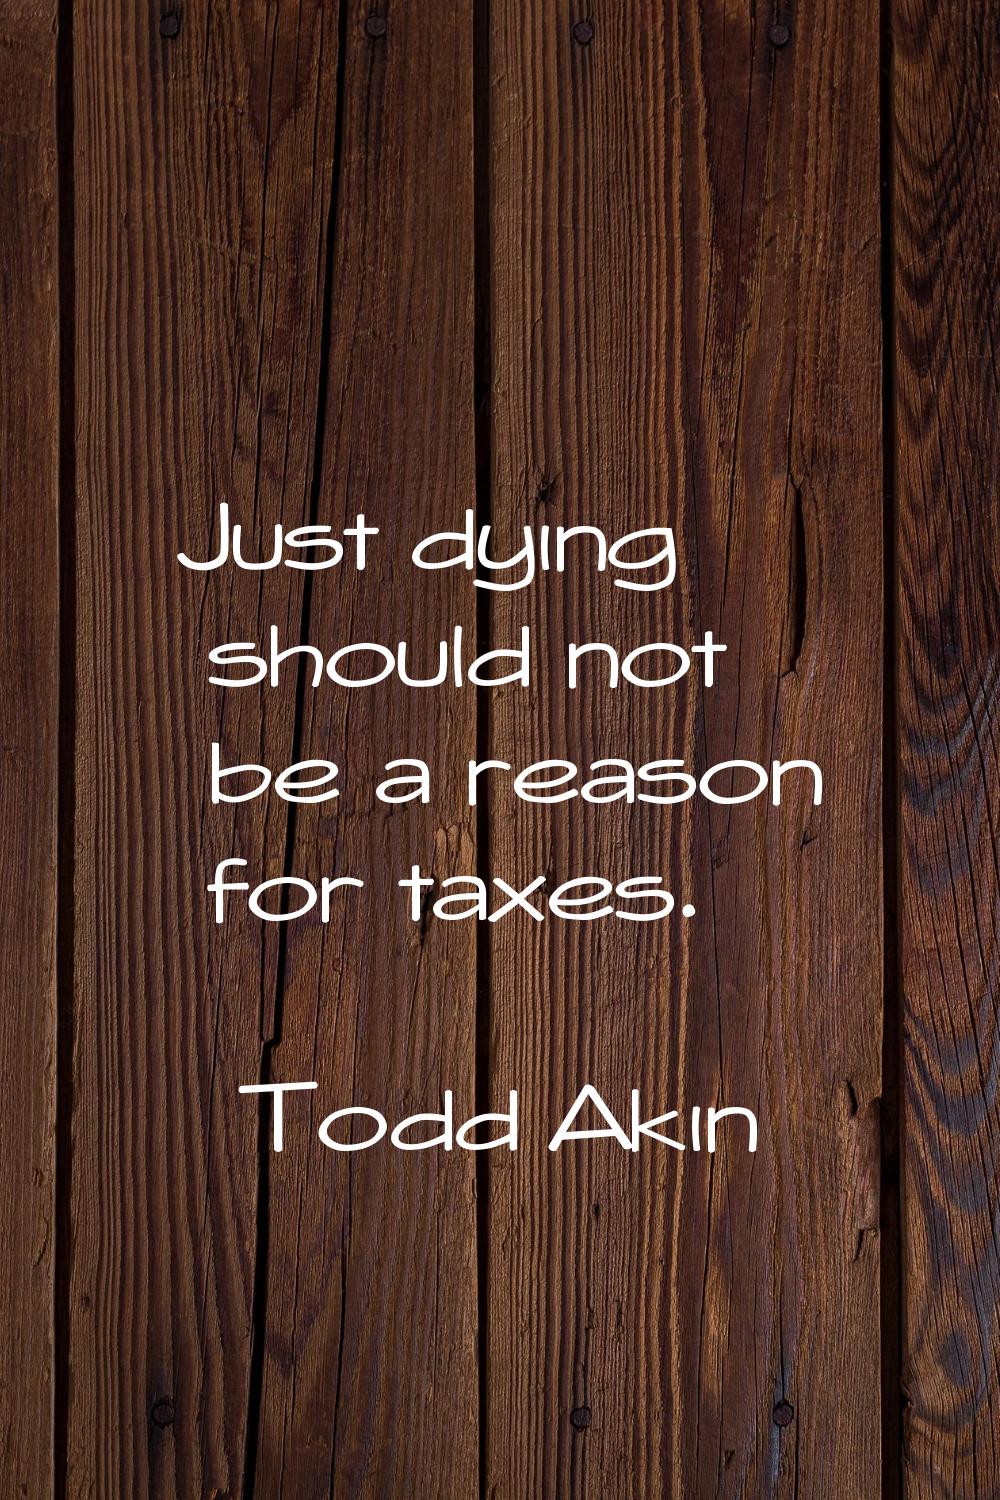 Just dying should not be a reason for taxes.